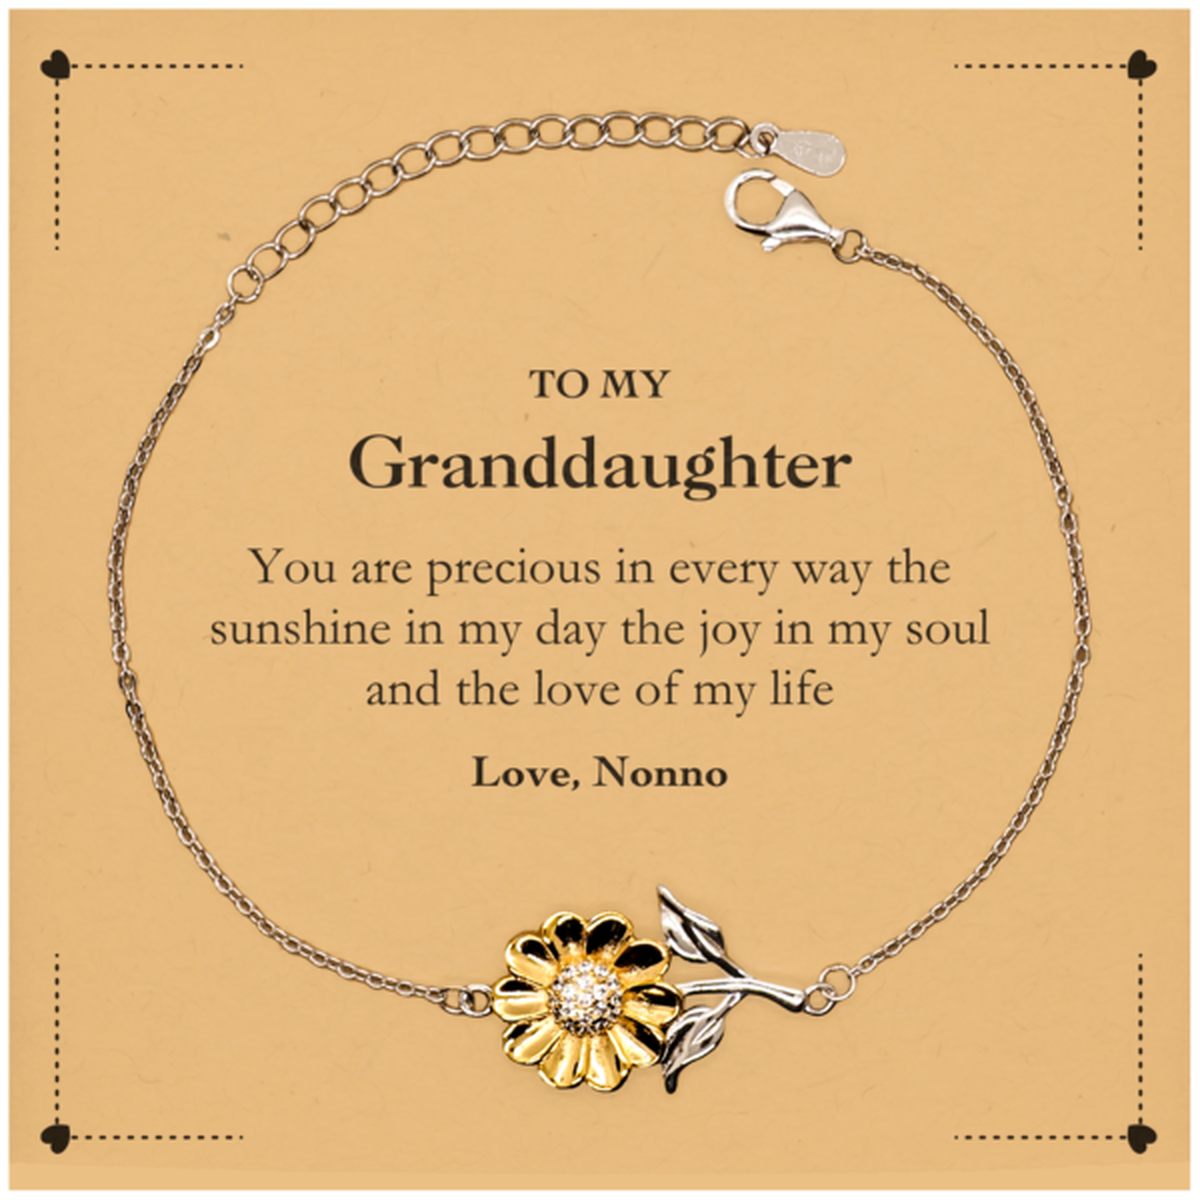 Graduation Gifts for Granddaughter Sunflower Bracelet Present from Nonno, Christmas Granddaughter Birthday Gifts Granddaughter You are precious in every way the sunshine in my day. Love, Nonno